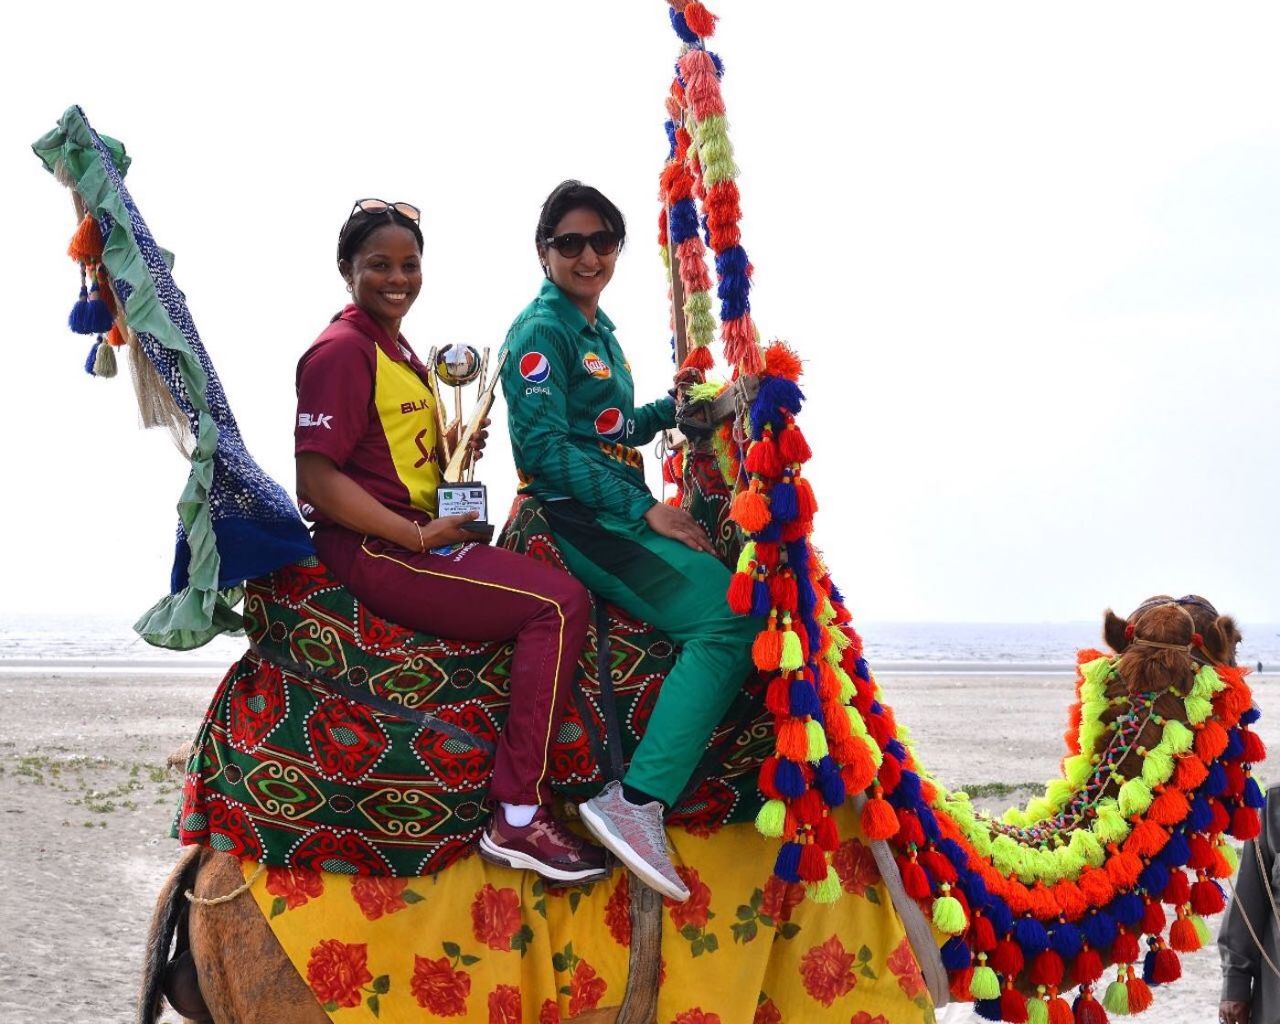 Merissa Aguilleira and Bismah Maroof pose with the T20I trophy in an unusual manner, Karachi, January 30, 2019